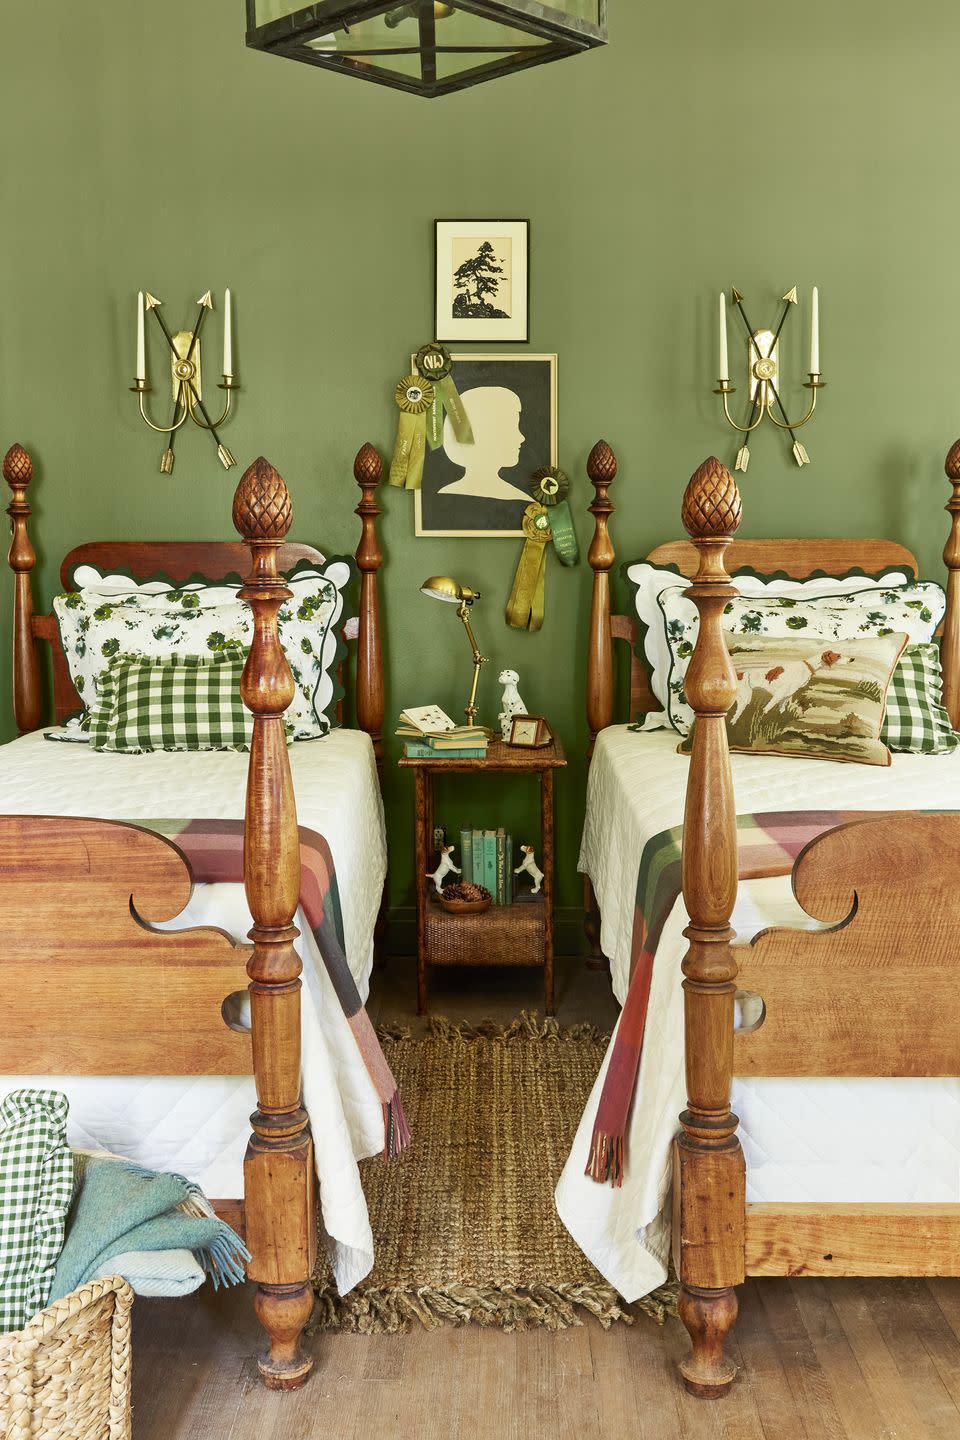 guest bedroom with green walls and twin beds, vintage and farmhouse decor